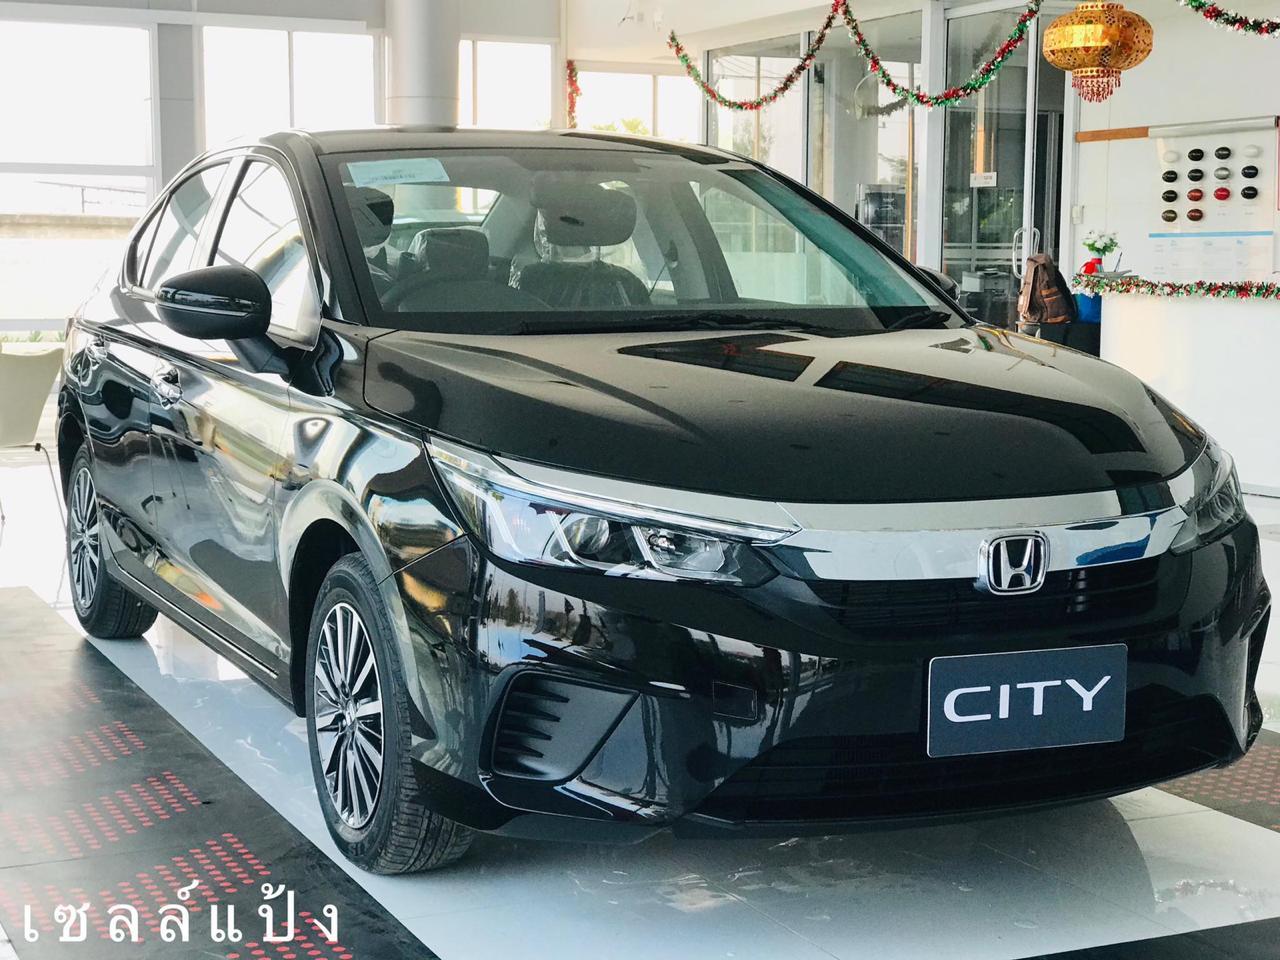 Honda City 2020 Launched in Thailand - City - PakWheels Forums